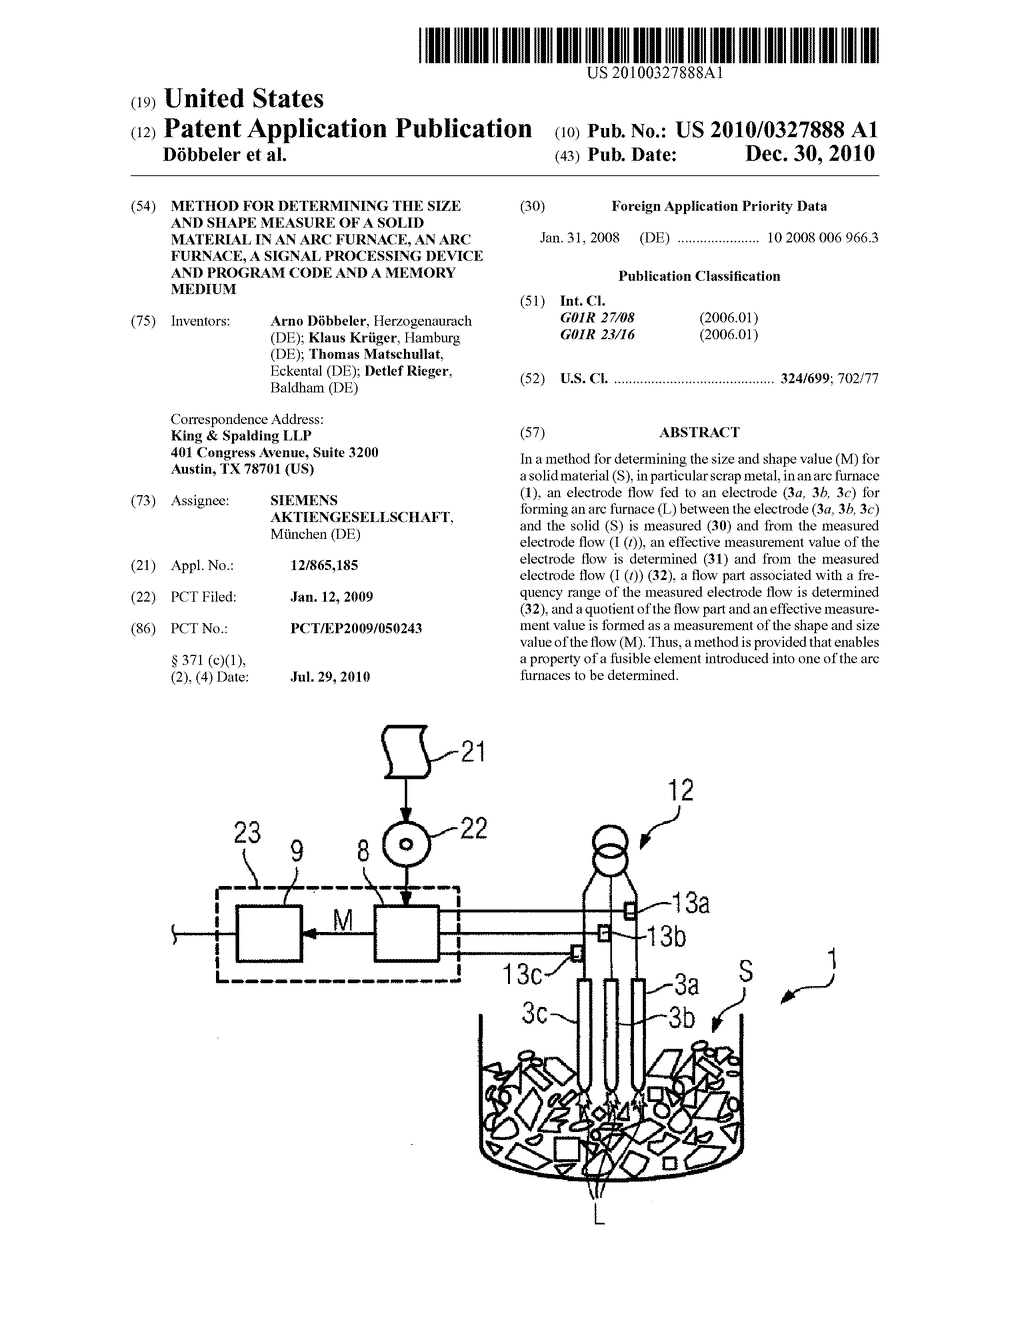 METHOD FOR DETERMINING THE SIZE AND SHAPE MEASURE OF A SOLID MATERIAL IN AN ARC FURNACE, AN ARC FURNACE, A SIGNAL PROCESSING DEVICE AND PROGRAM CODE AND A MEMORY MEDIUM - diagram, schematic, and image 01